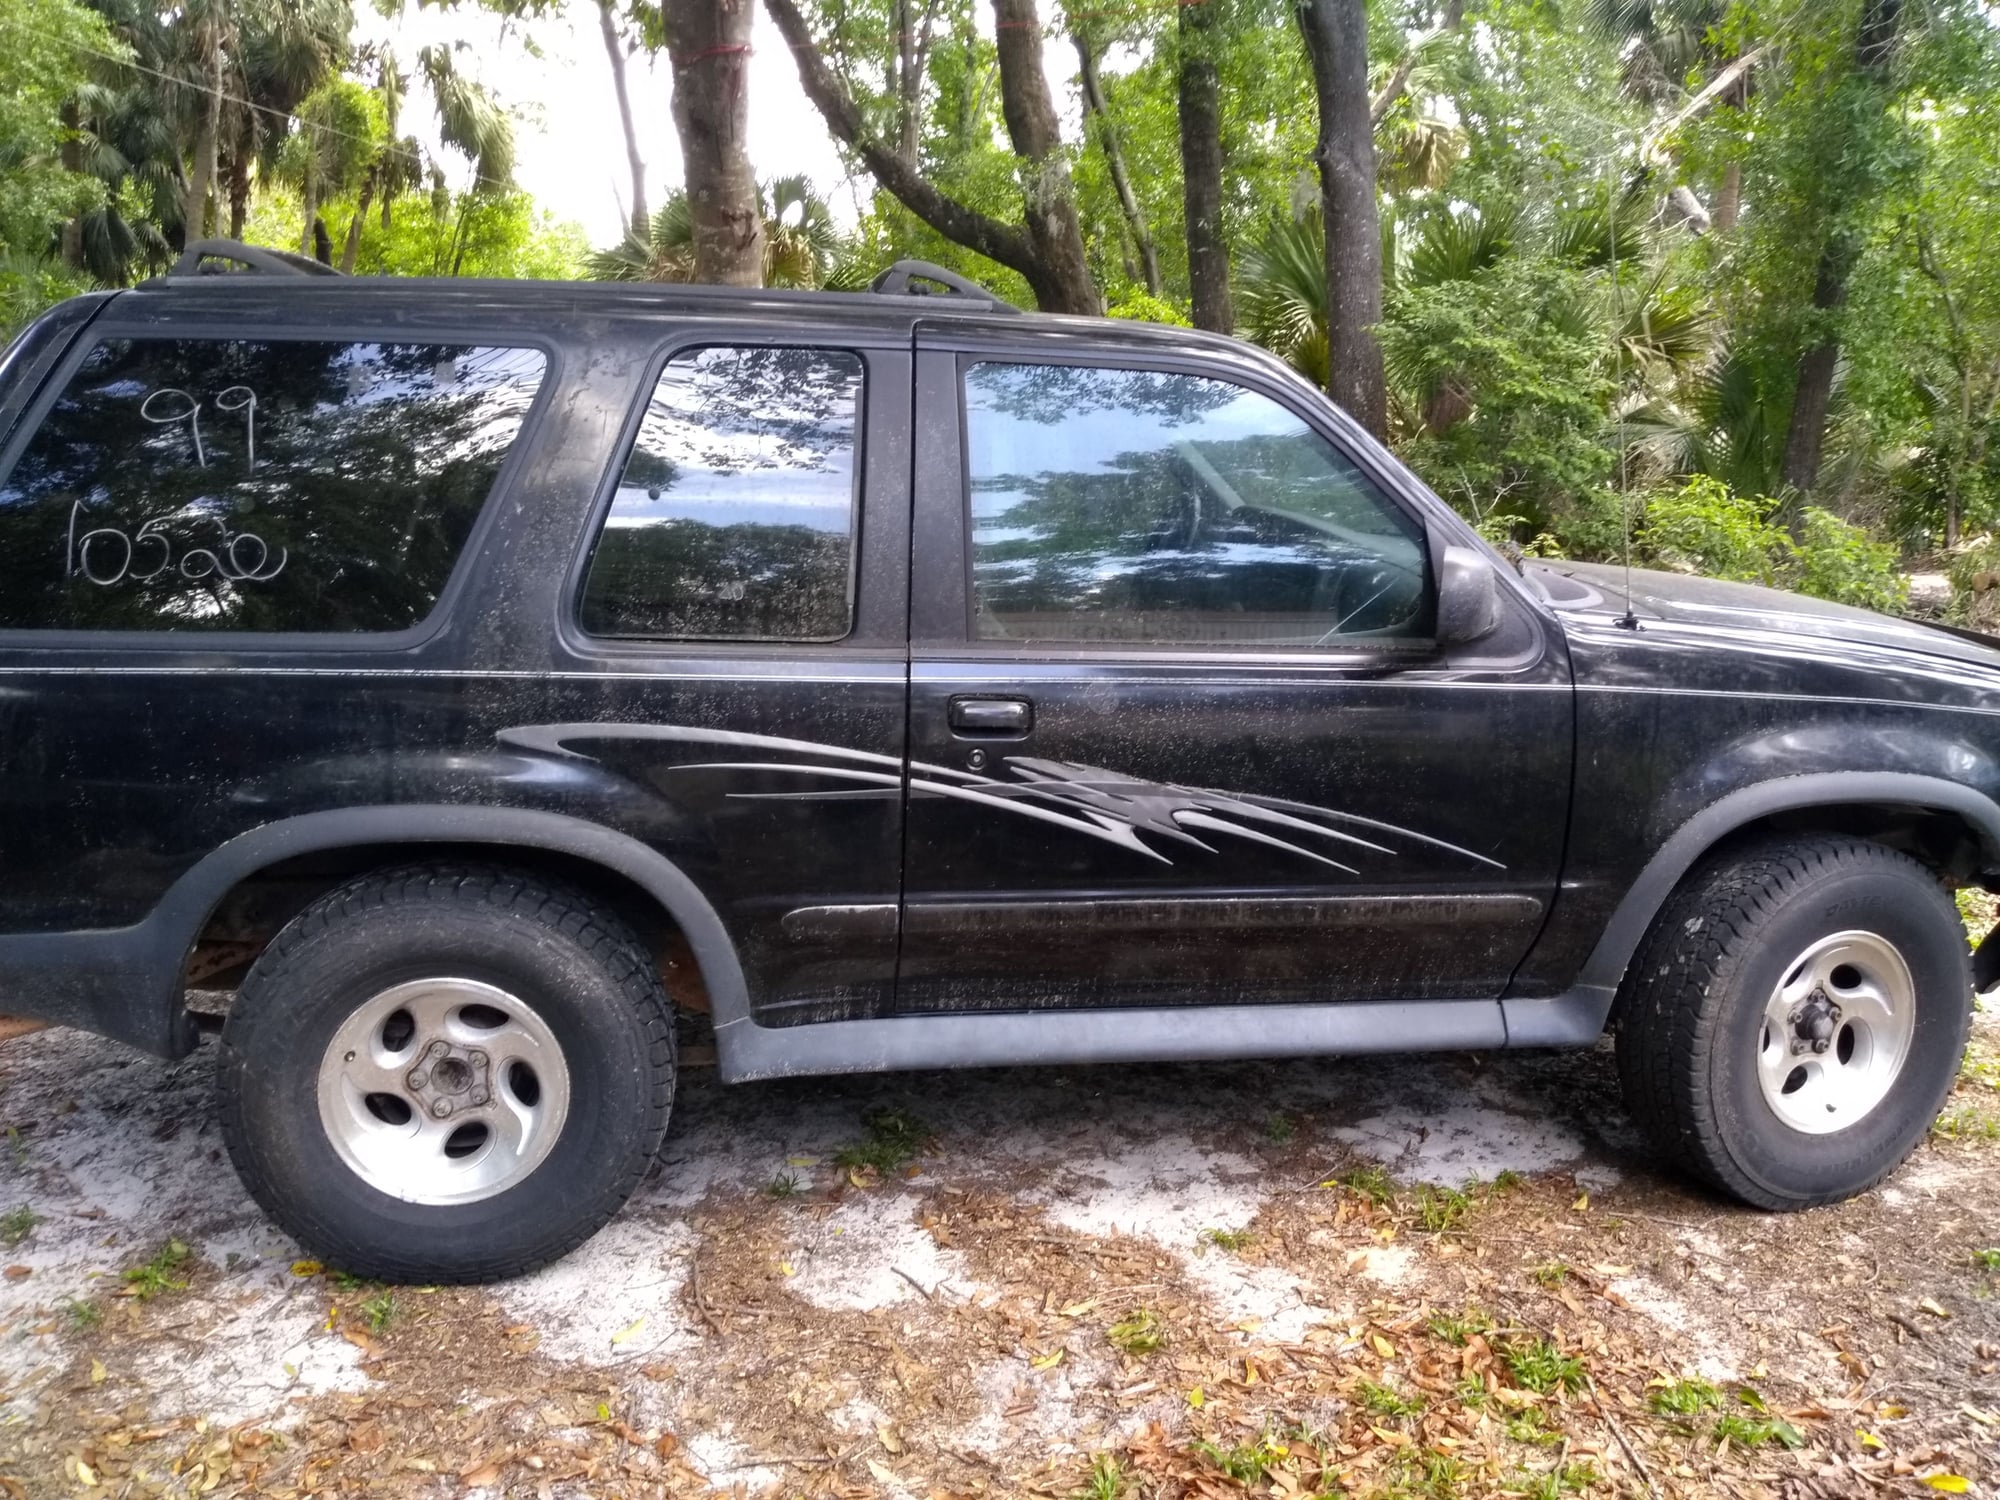 99 Ford explorer 4.0 Ford Truck Enthusiasts Forums